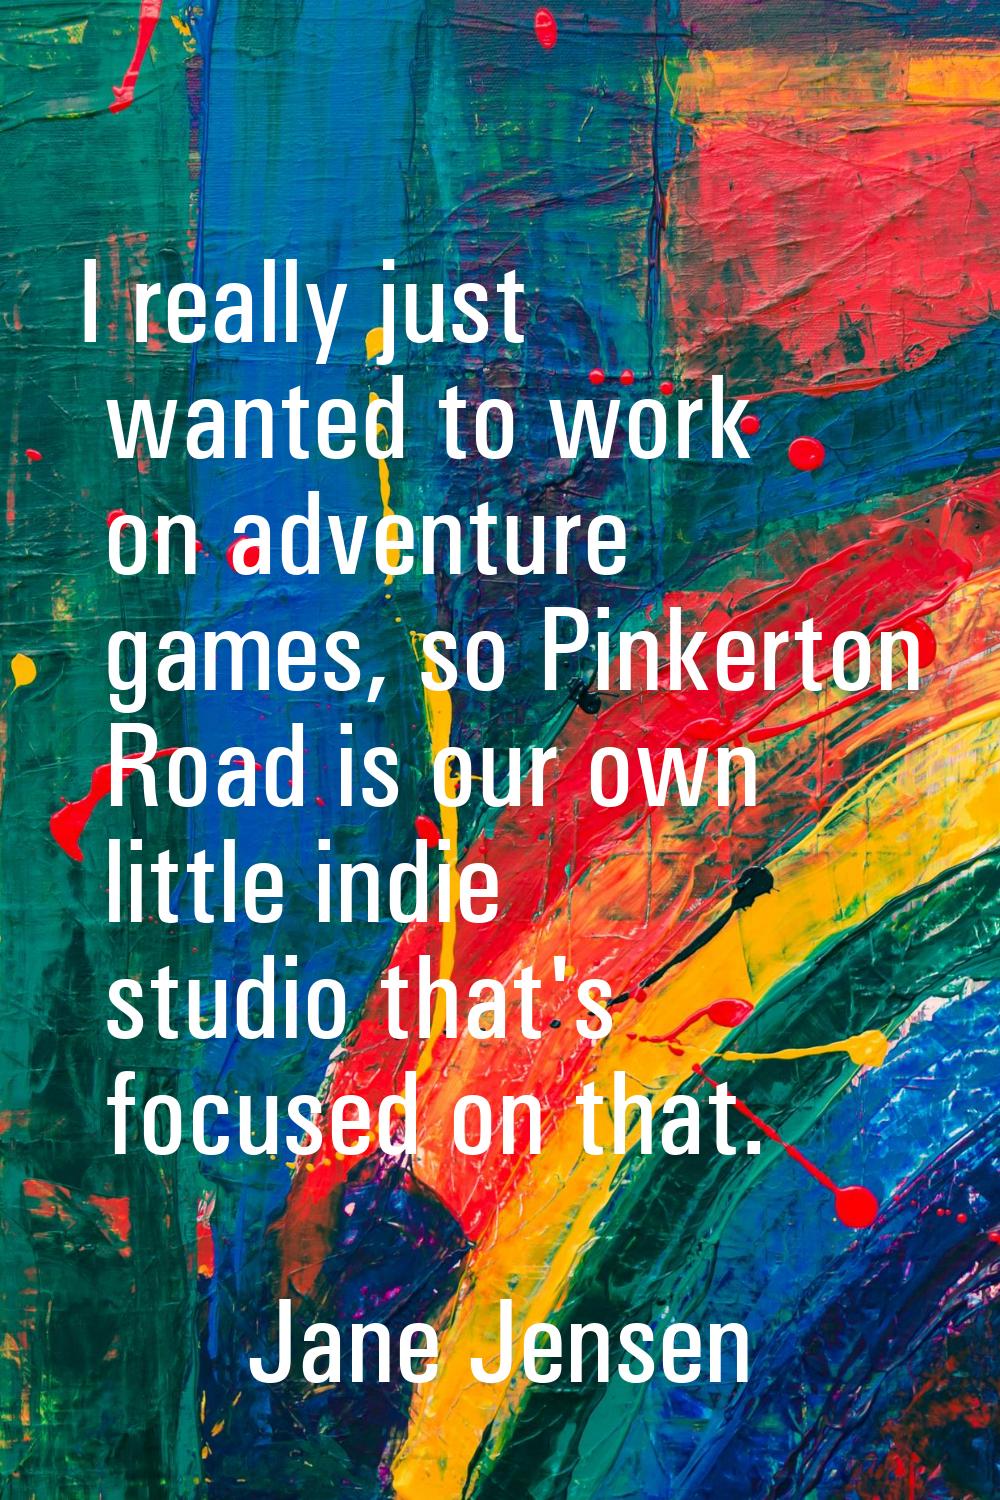 I really just wanted to work on adventure games, so Pinkerton Road is our own little indie studio t